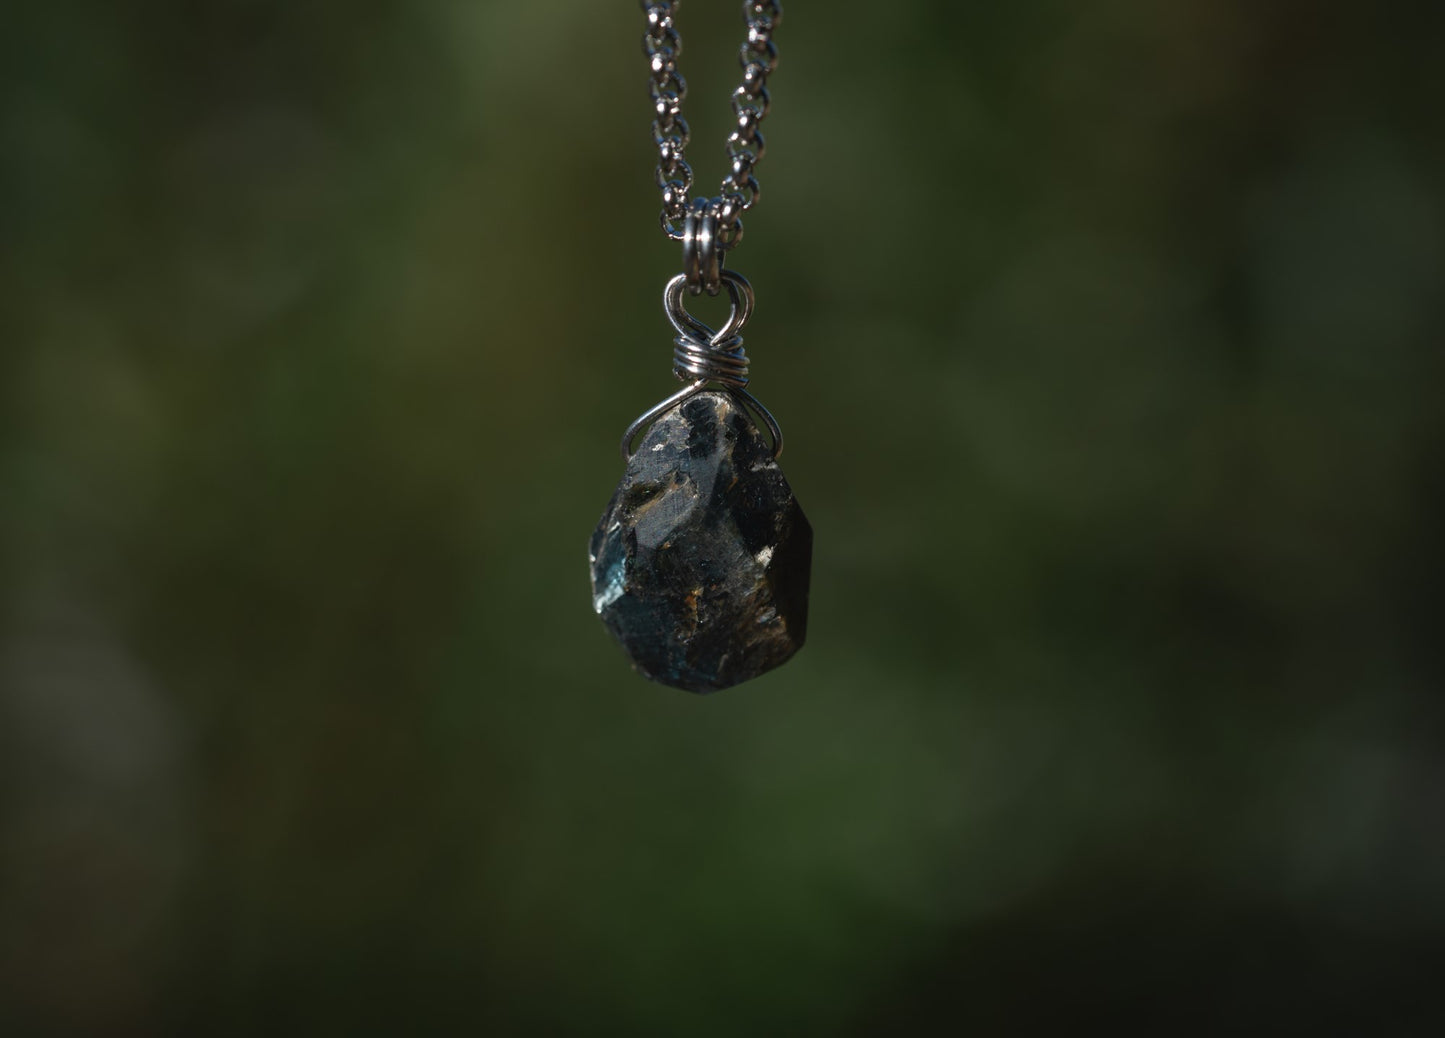 'Speak Your Truth' Faceted Kyanite Drop Stainless Steel Necklace